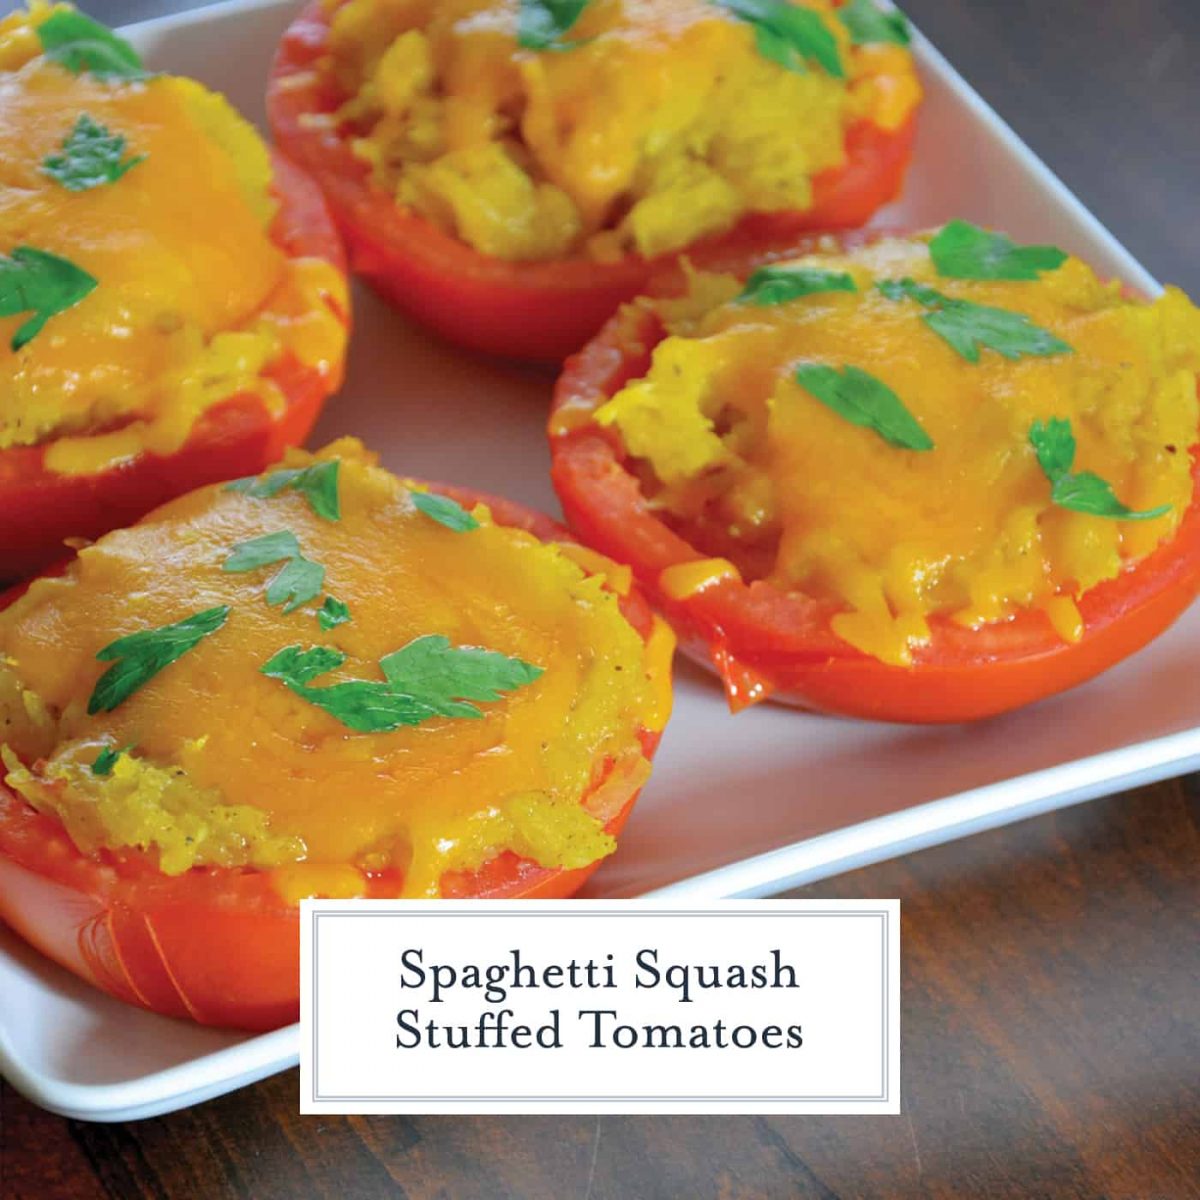 Spaghetti Squash Stuffed Tomatoes are juicy hallowed out tomatoes filled with spaghetti squash and topped with gooey cheddar cheese. The perfect low carb side dish! #lowcarbsidedish #tomatorecipes #spaghettisquashrecipes www.savoryexperiments.com